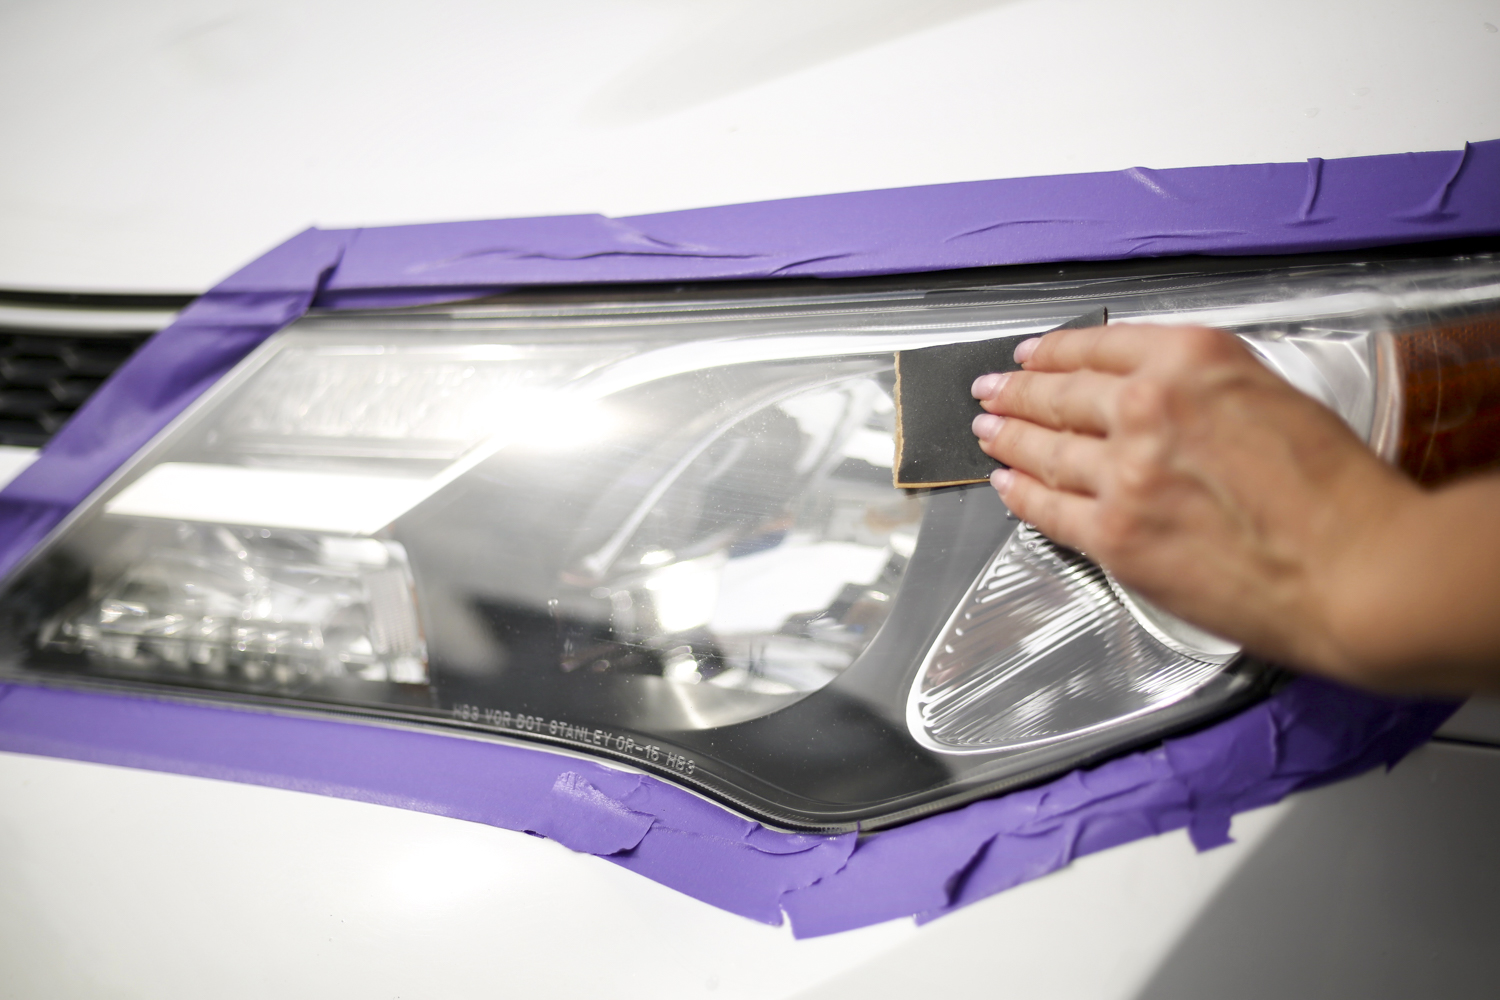 Car Headlight Cleaning Hacks  15 Best Tips From Experts - Montana Auto Pros